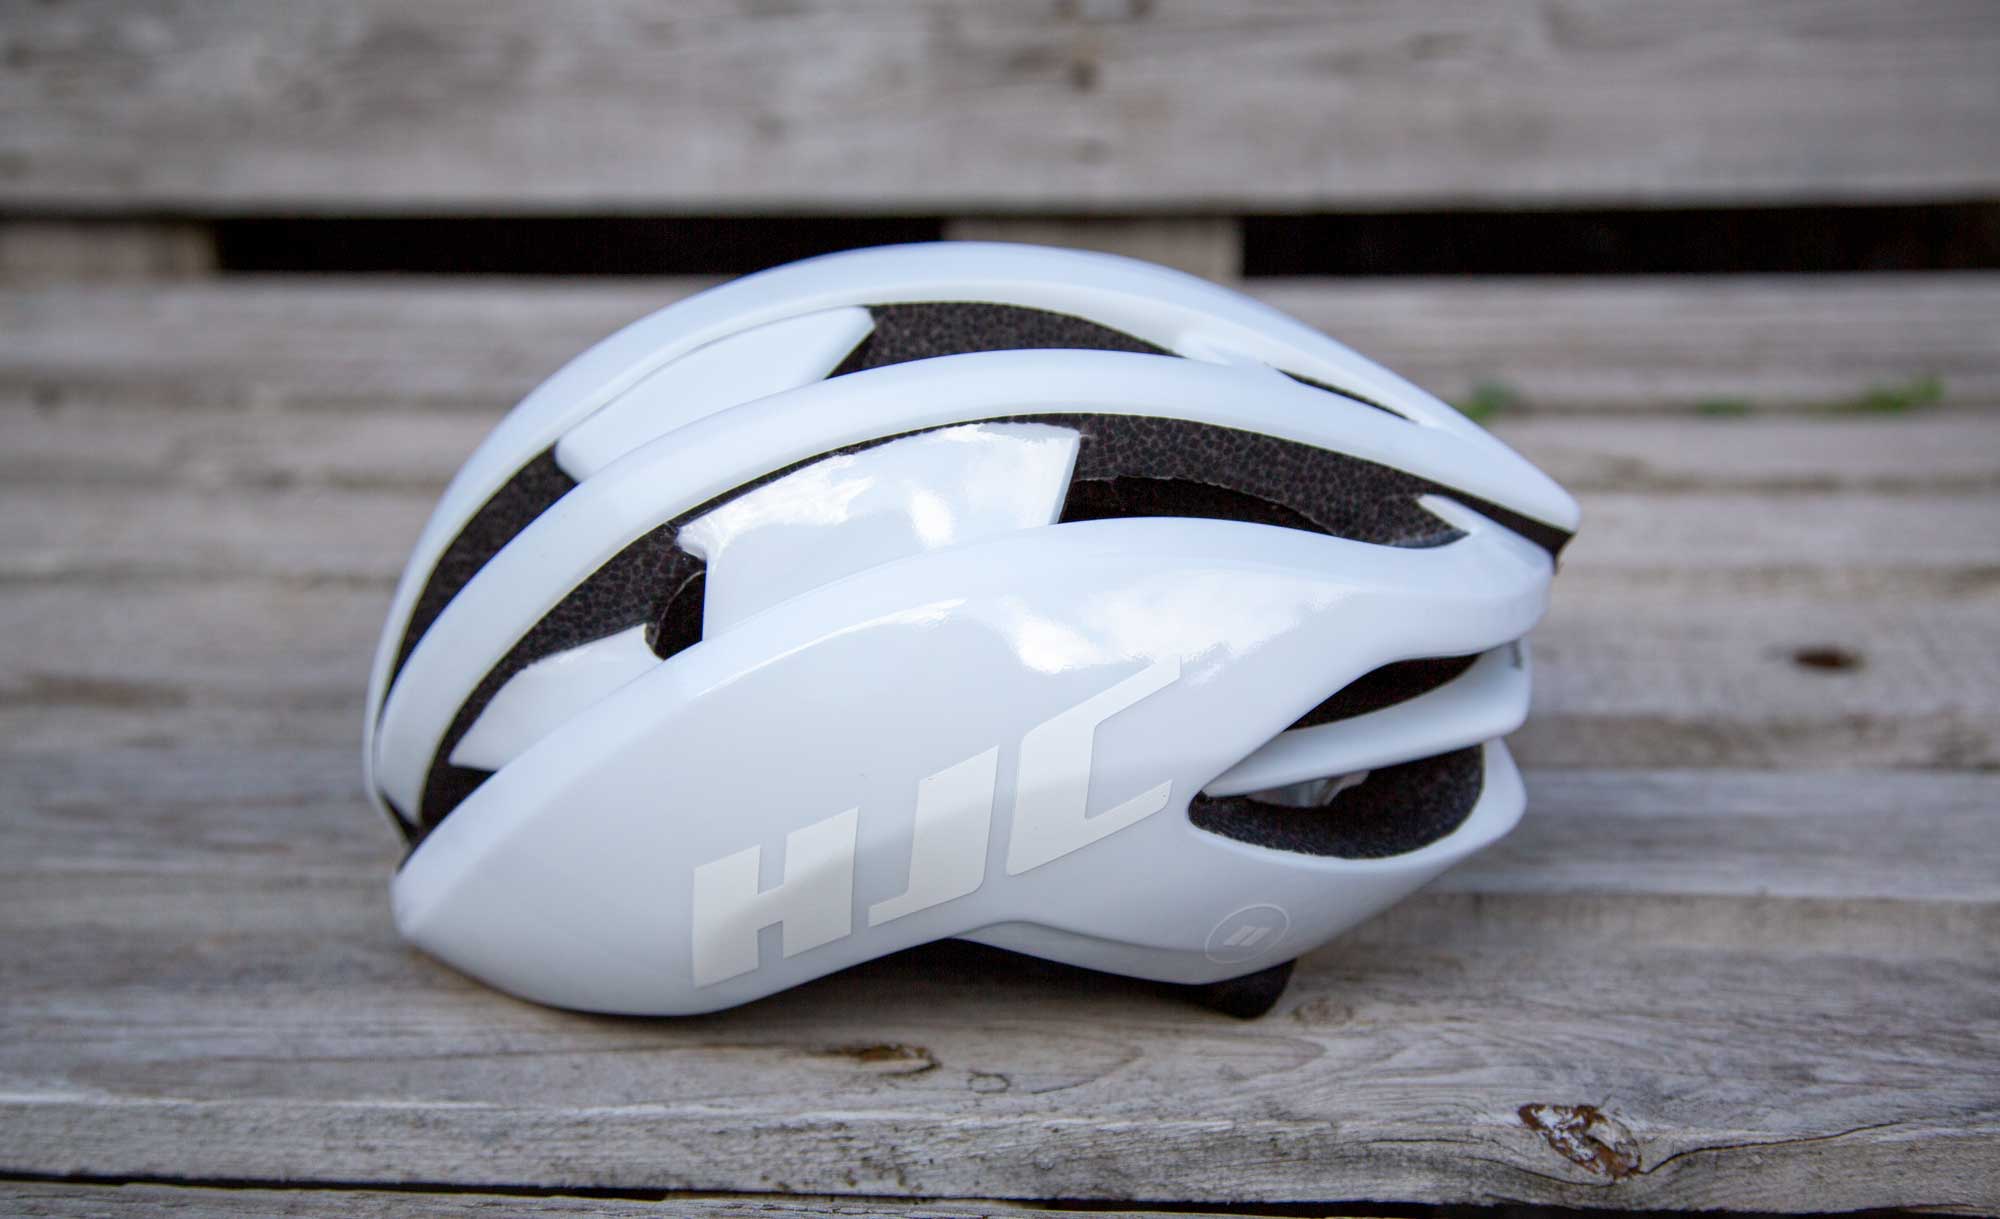 The best cycling helmets